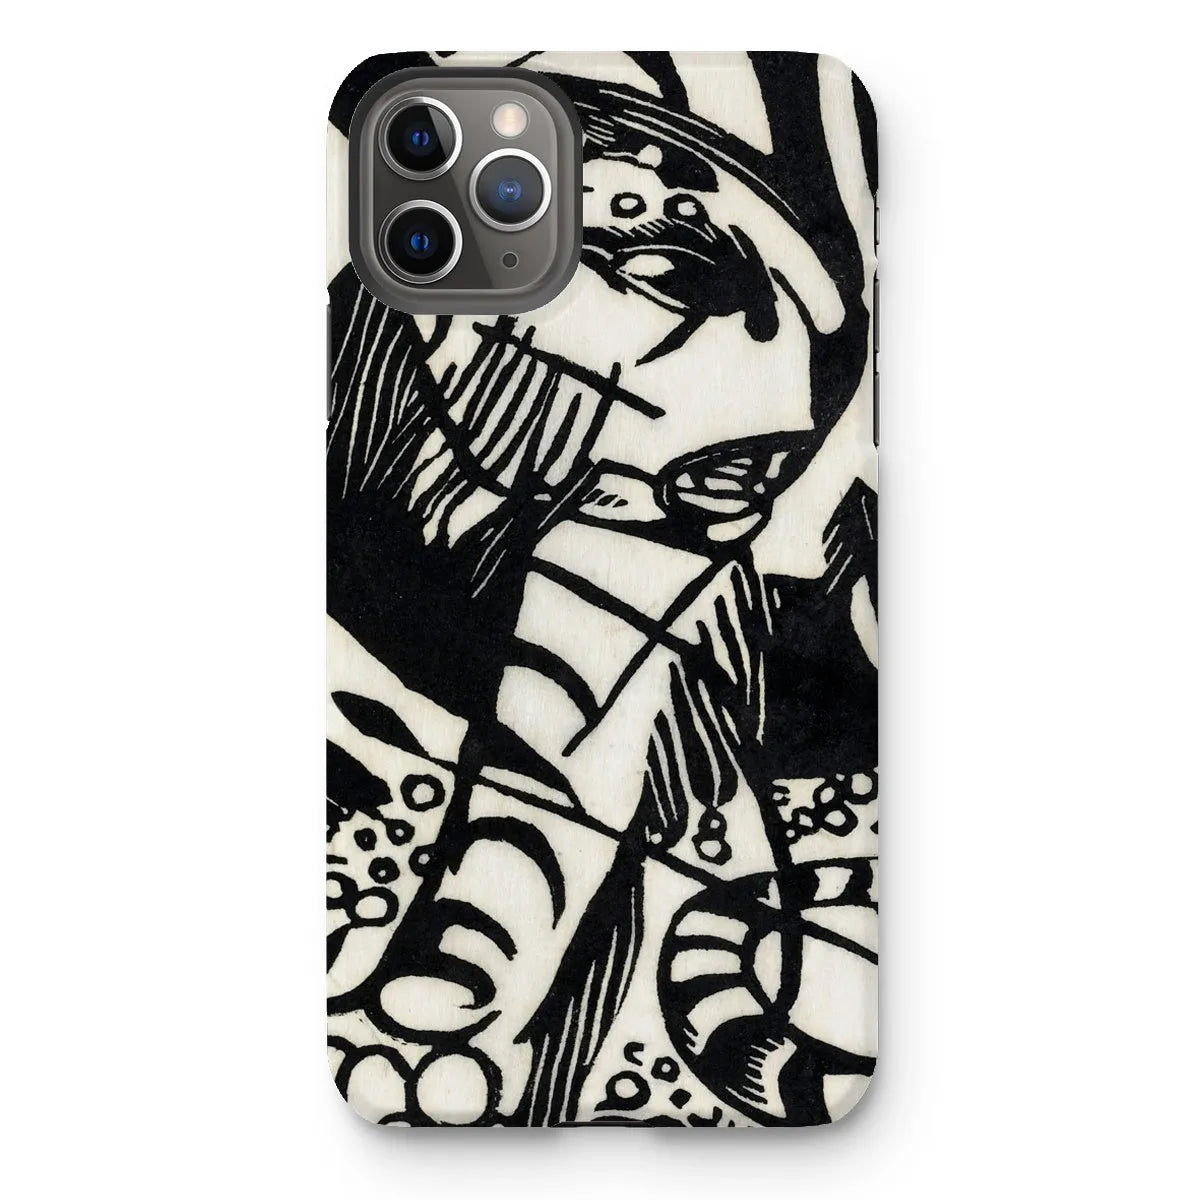 Tiger - Animal Aesthetic Phone Case - Franz Marc - Iphone 11 Pro Max / Matte - Mobile Phone Cases - Aesthetic Art